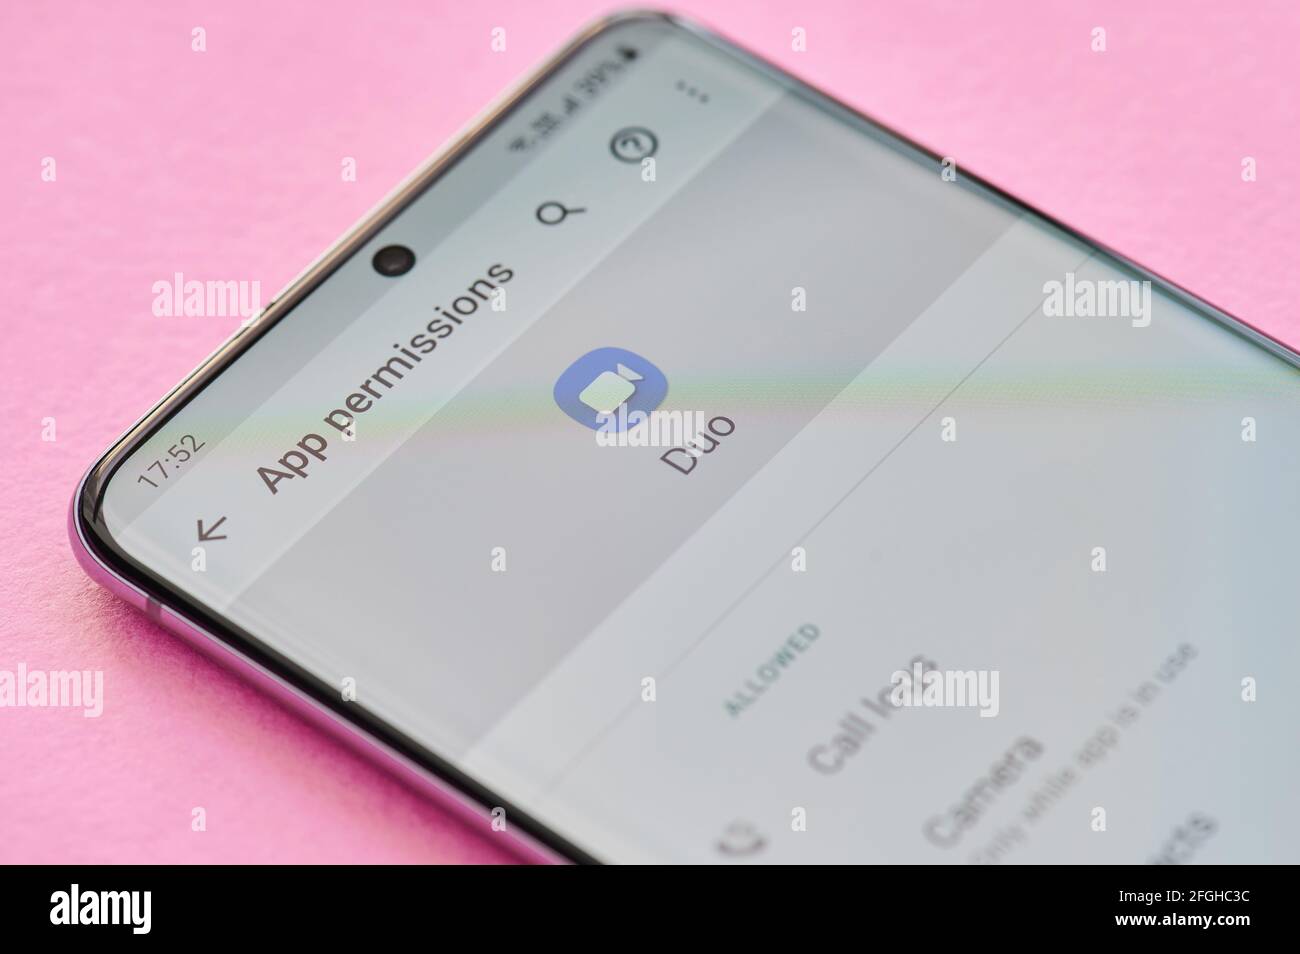 New york, USA - April 23, 2021: Changing permissions setting of google duo app on smartphone screen macro close up view Stock Photo